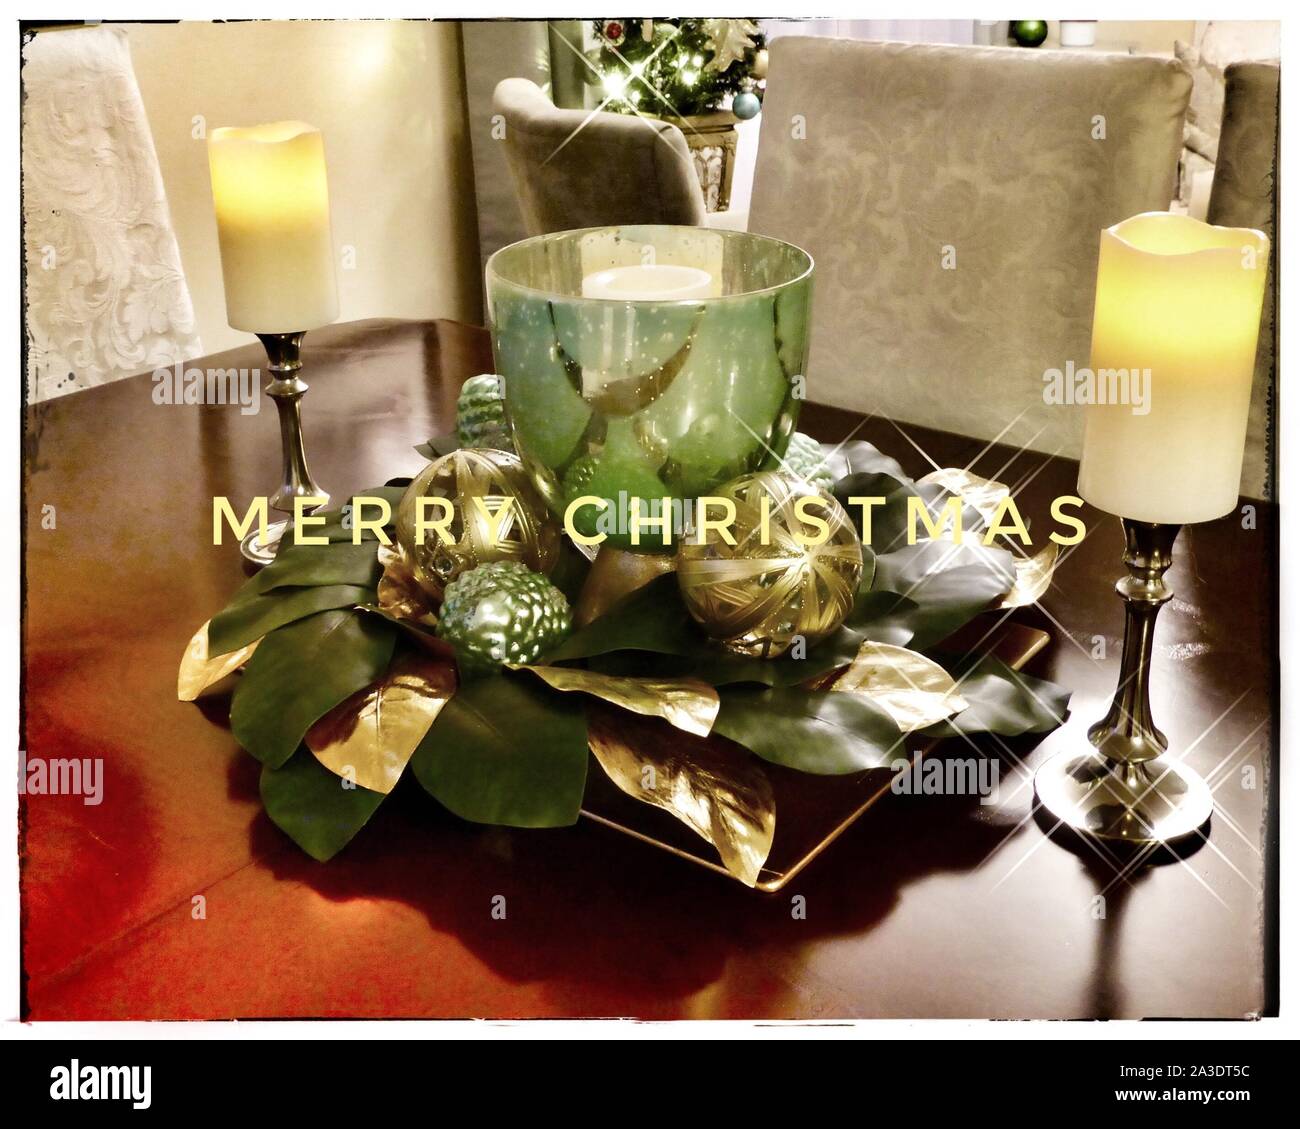 Merry Christmas mint Green centrepiece Stock Photo